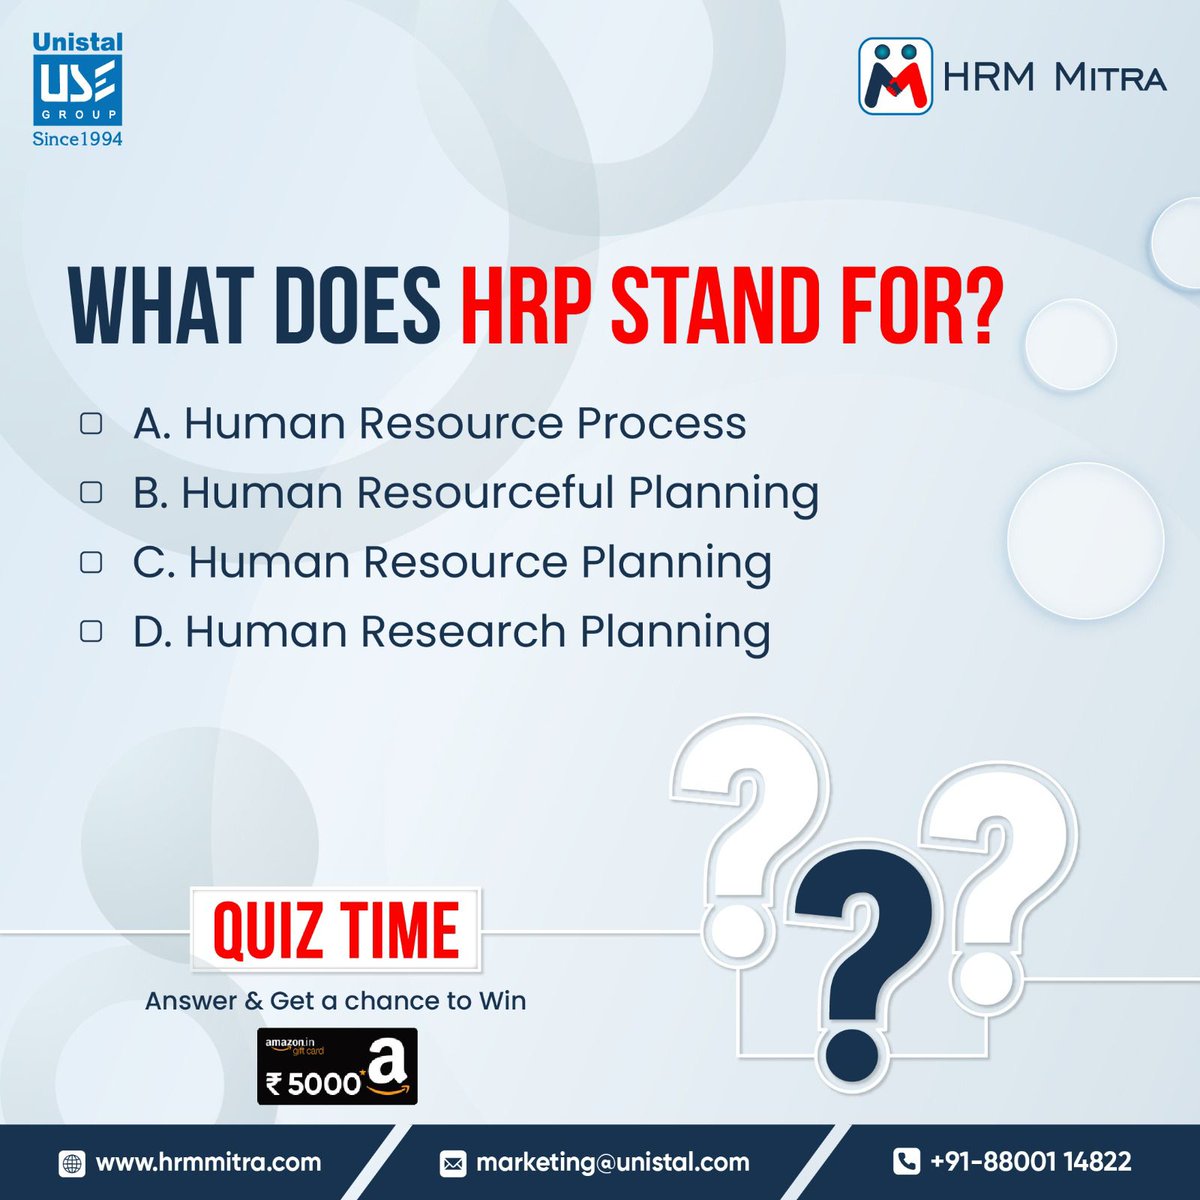 You could win Rs.5000! Tell us the correct full form of HRP and be our lucky winner. Answer, Like, Share, and Repost to win Rs. 5000 worth of Amazon vouchers. Comment now #PrizeGiveaway #RewardYourself #ParticipateAndWin #ContestTime #LuckyWinner #HRMMitra #Quiz